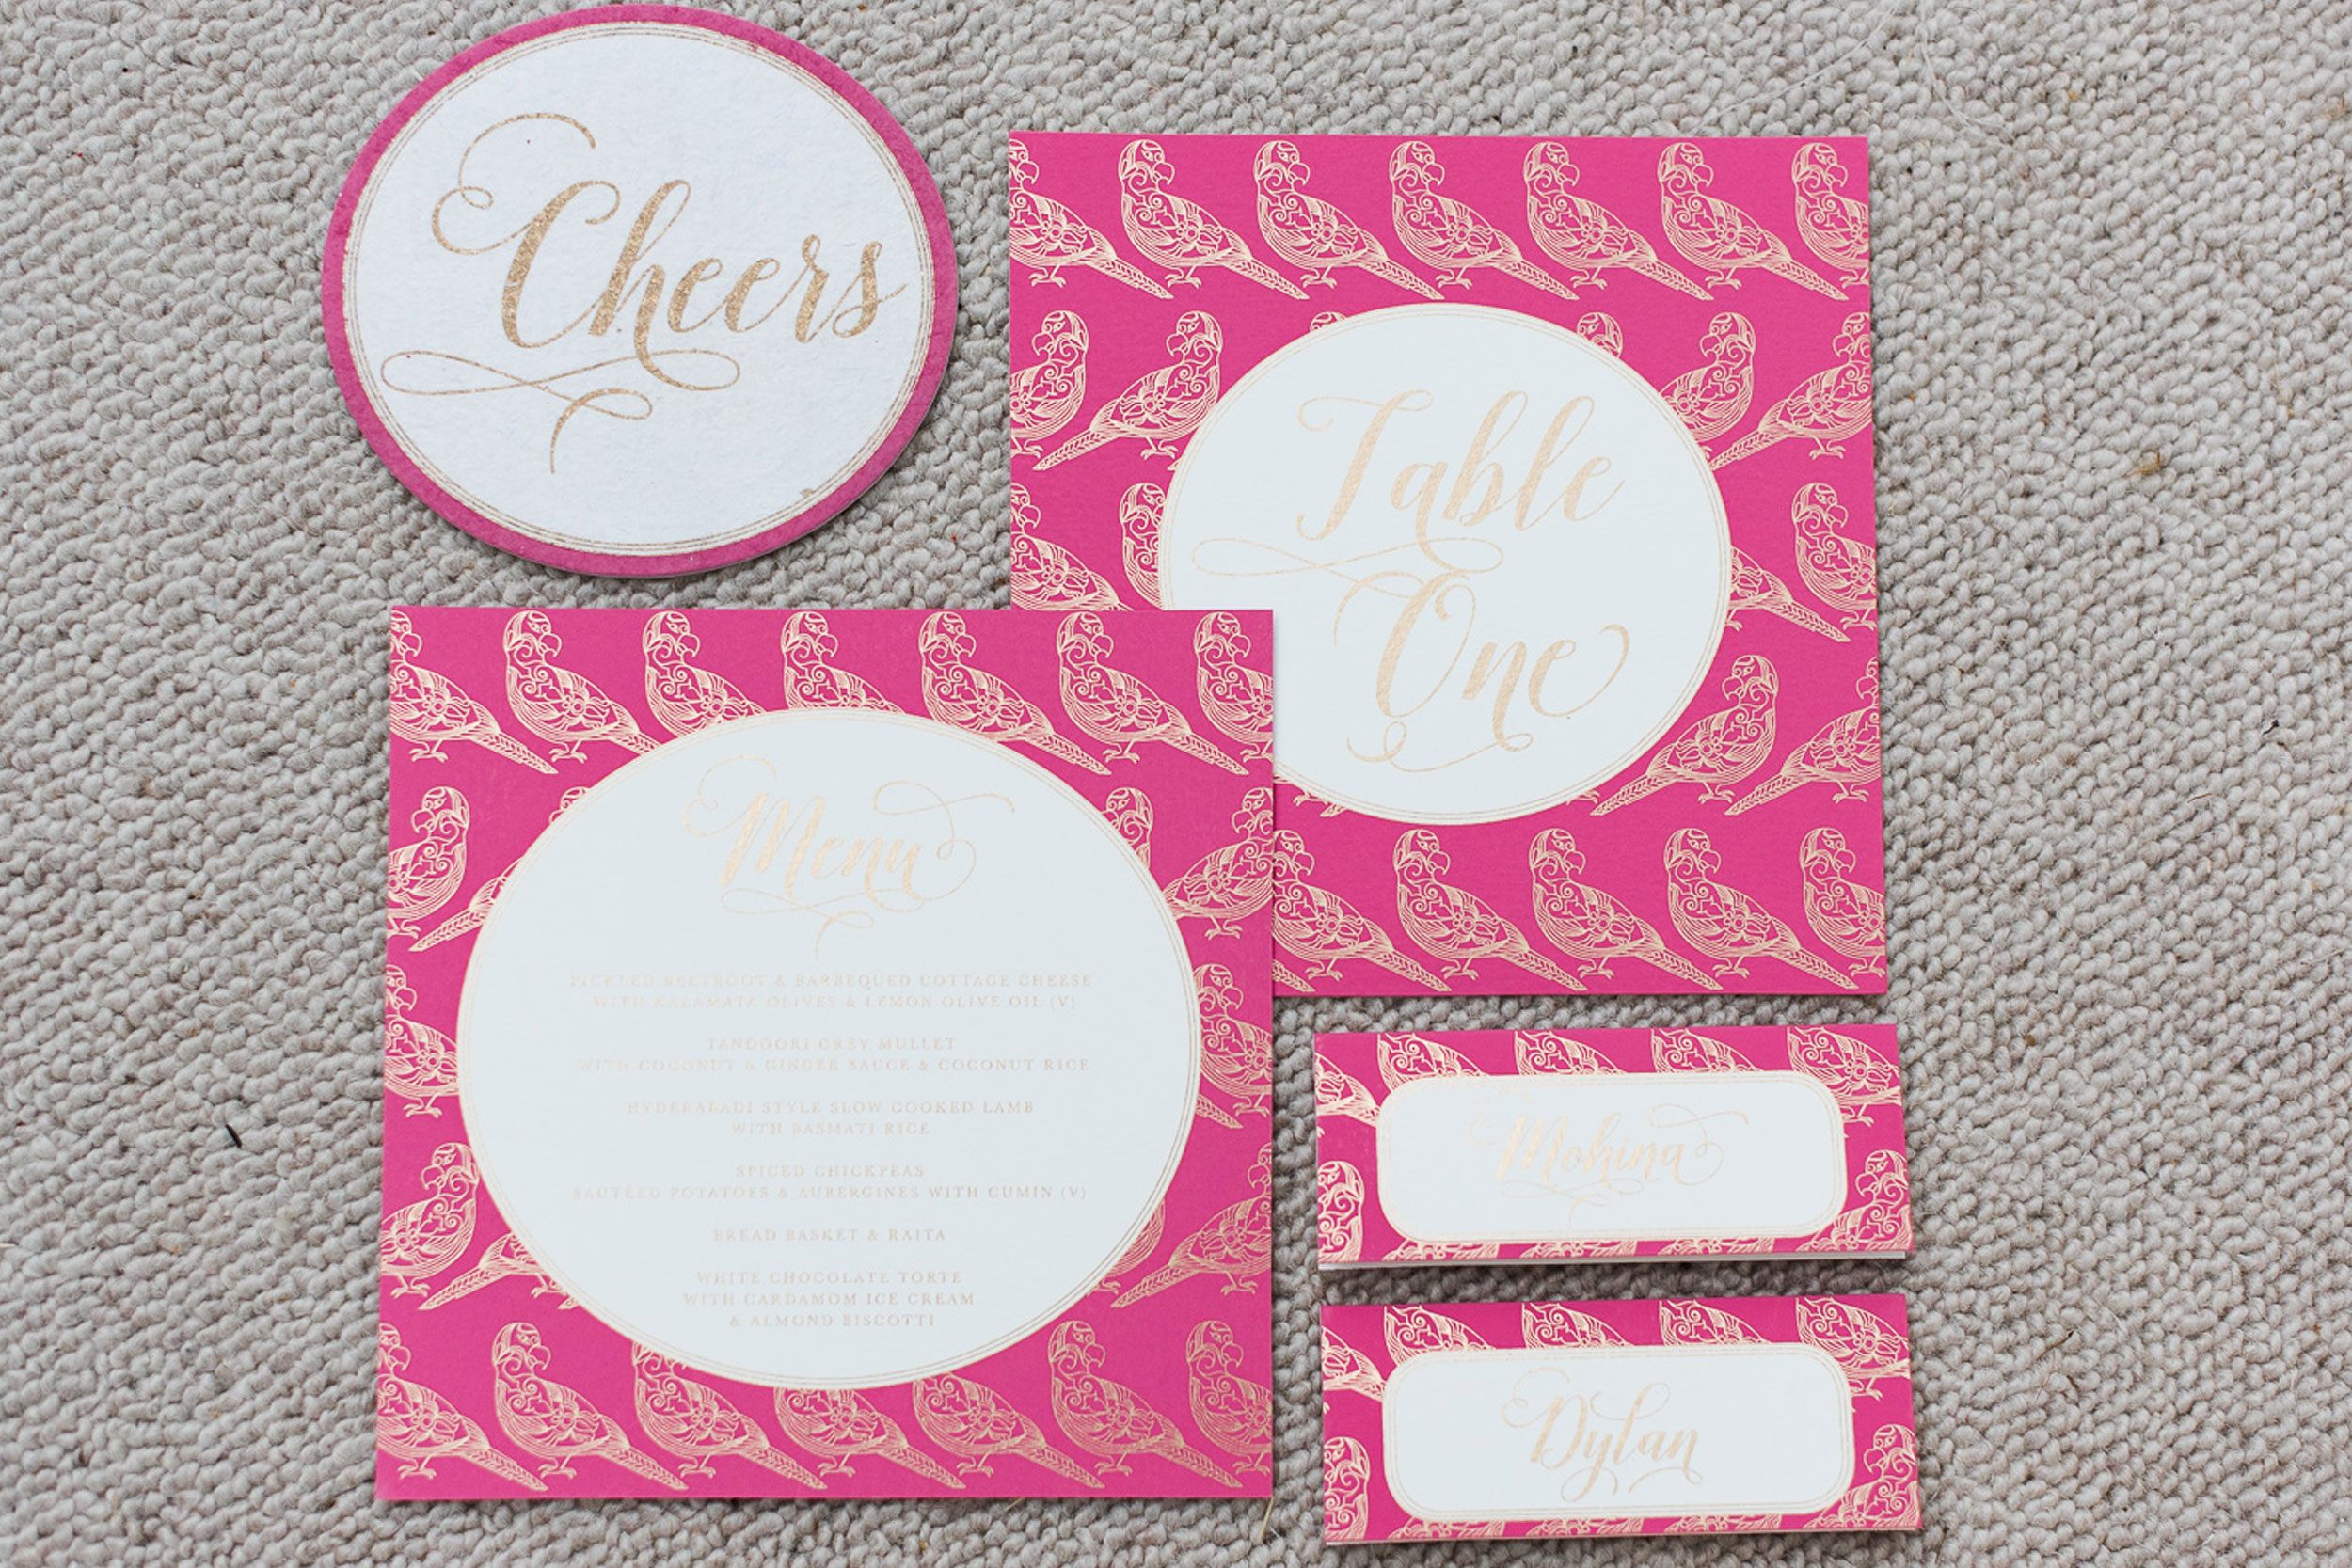 trio-of-life-pink-parrot-table-number-and-coaster-wedding-invitation.jpg